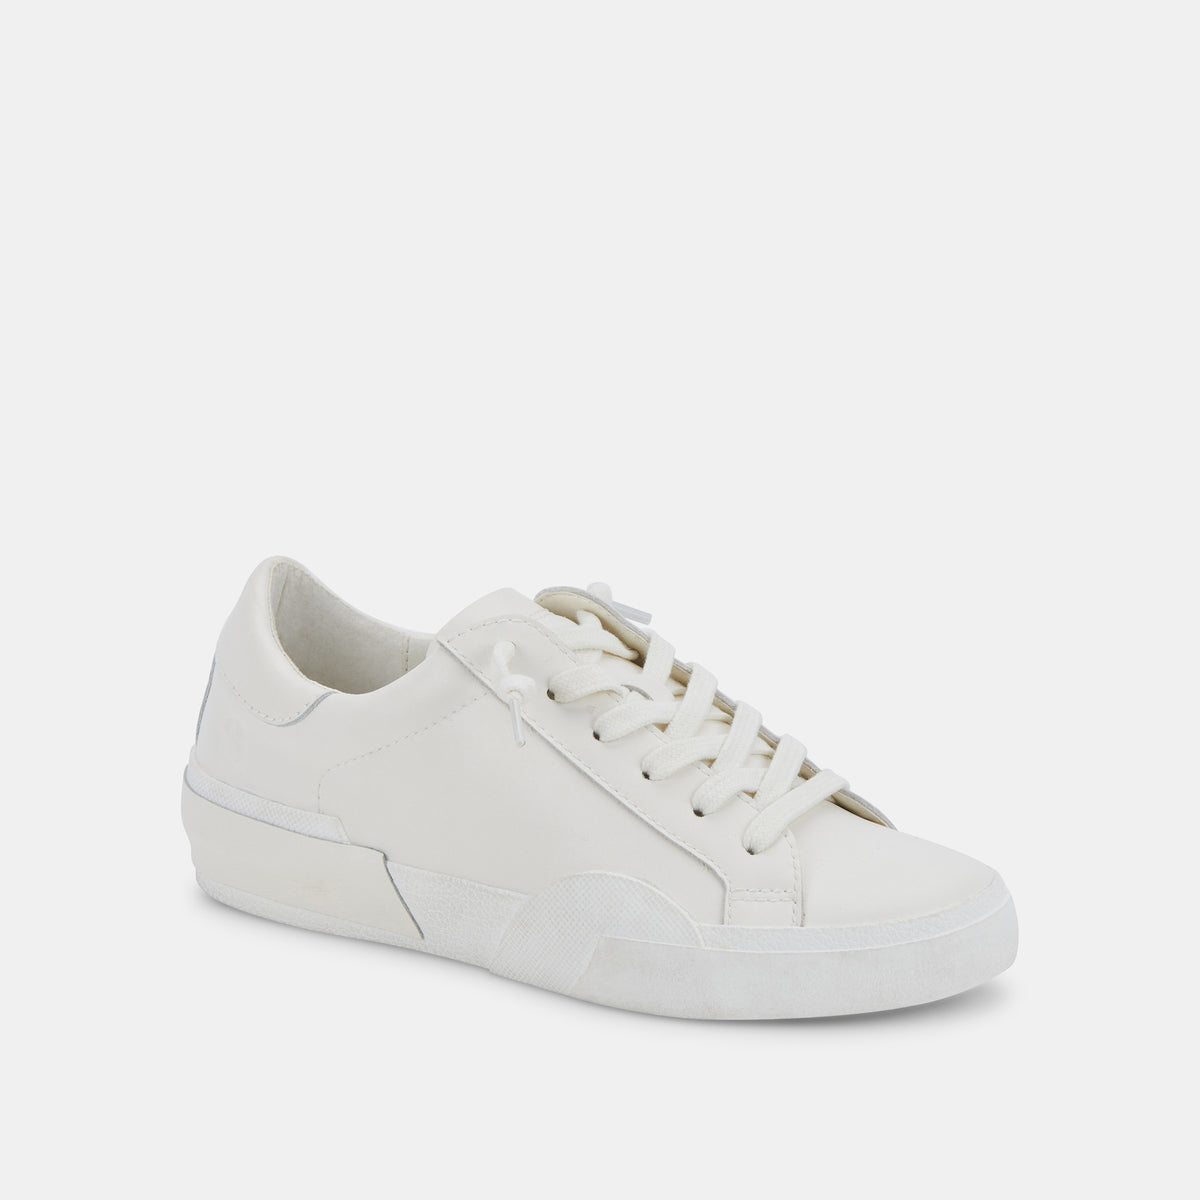 Zina 306 Sneakers White Recycled Leather | White Leather Sneakers ...